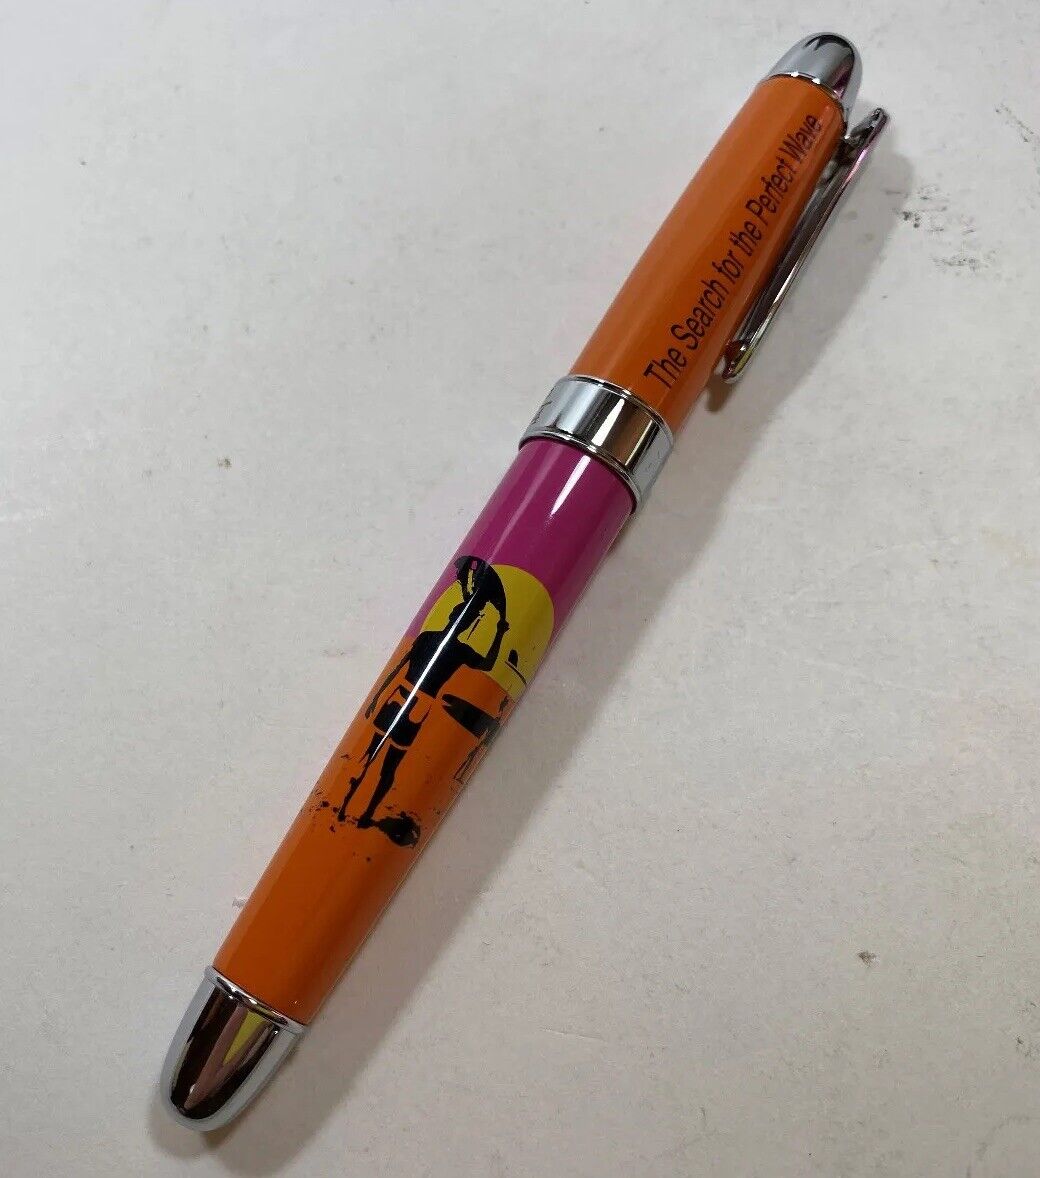 Archived ACME Studio “The Endless Summer” Artist Proof (AP) Rollerball Pen RARE